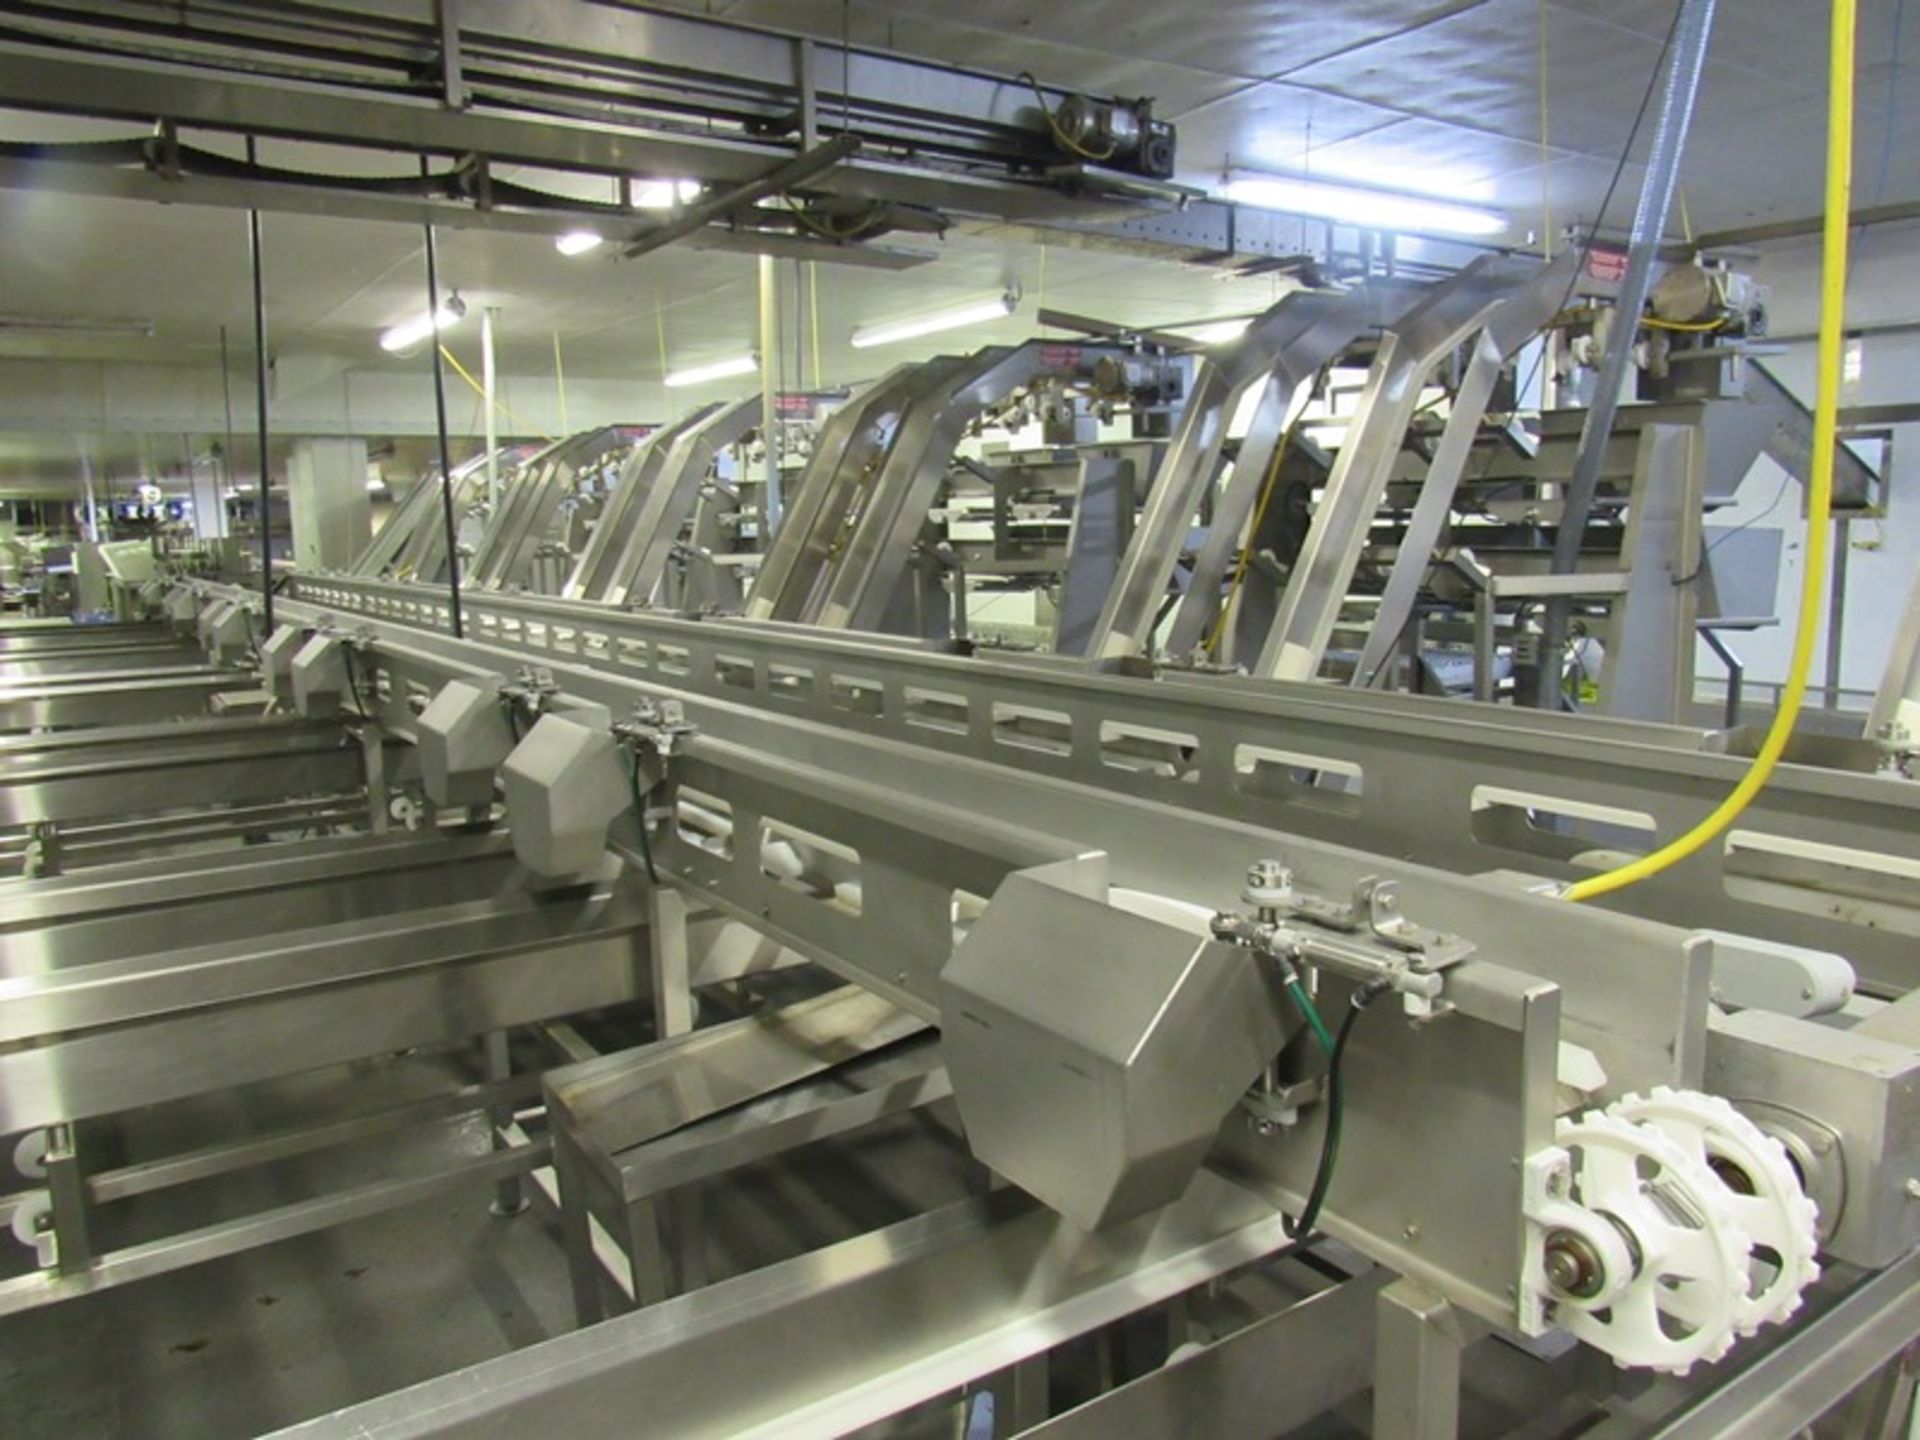 C.A.T. Stainless Steel Grading Line, dual lanes, 10 positions per lane, pneumatic drop chutes, - Image 16 of 22